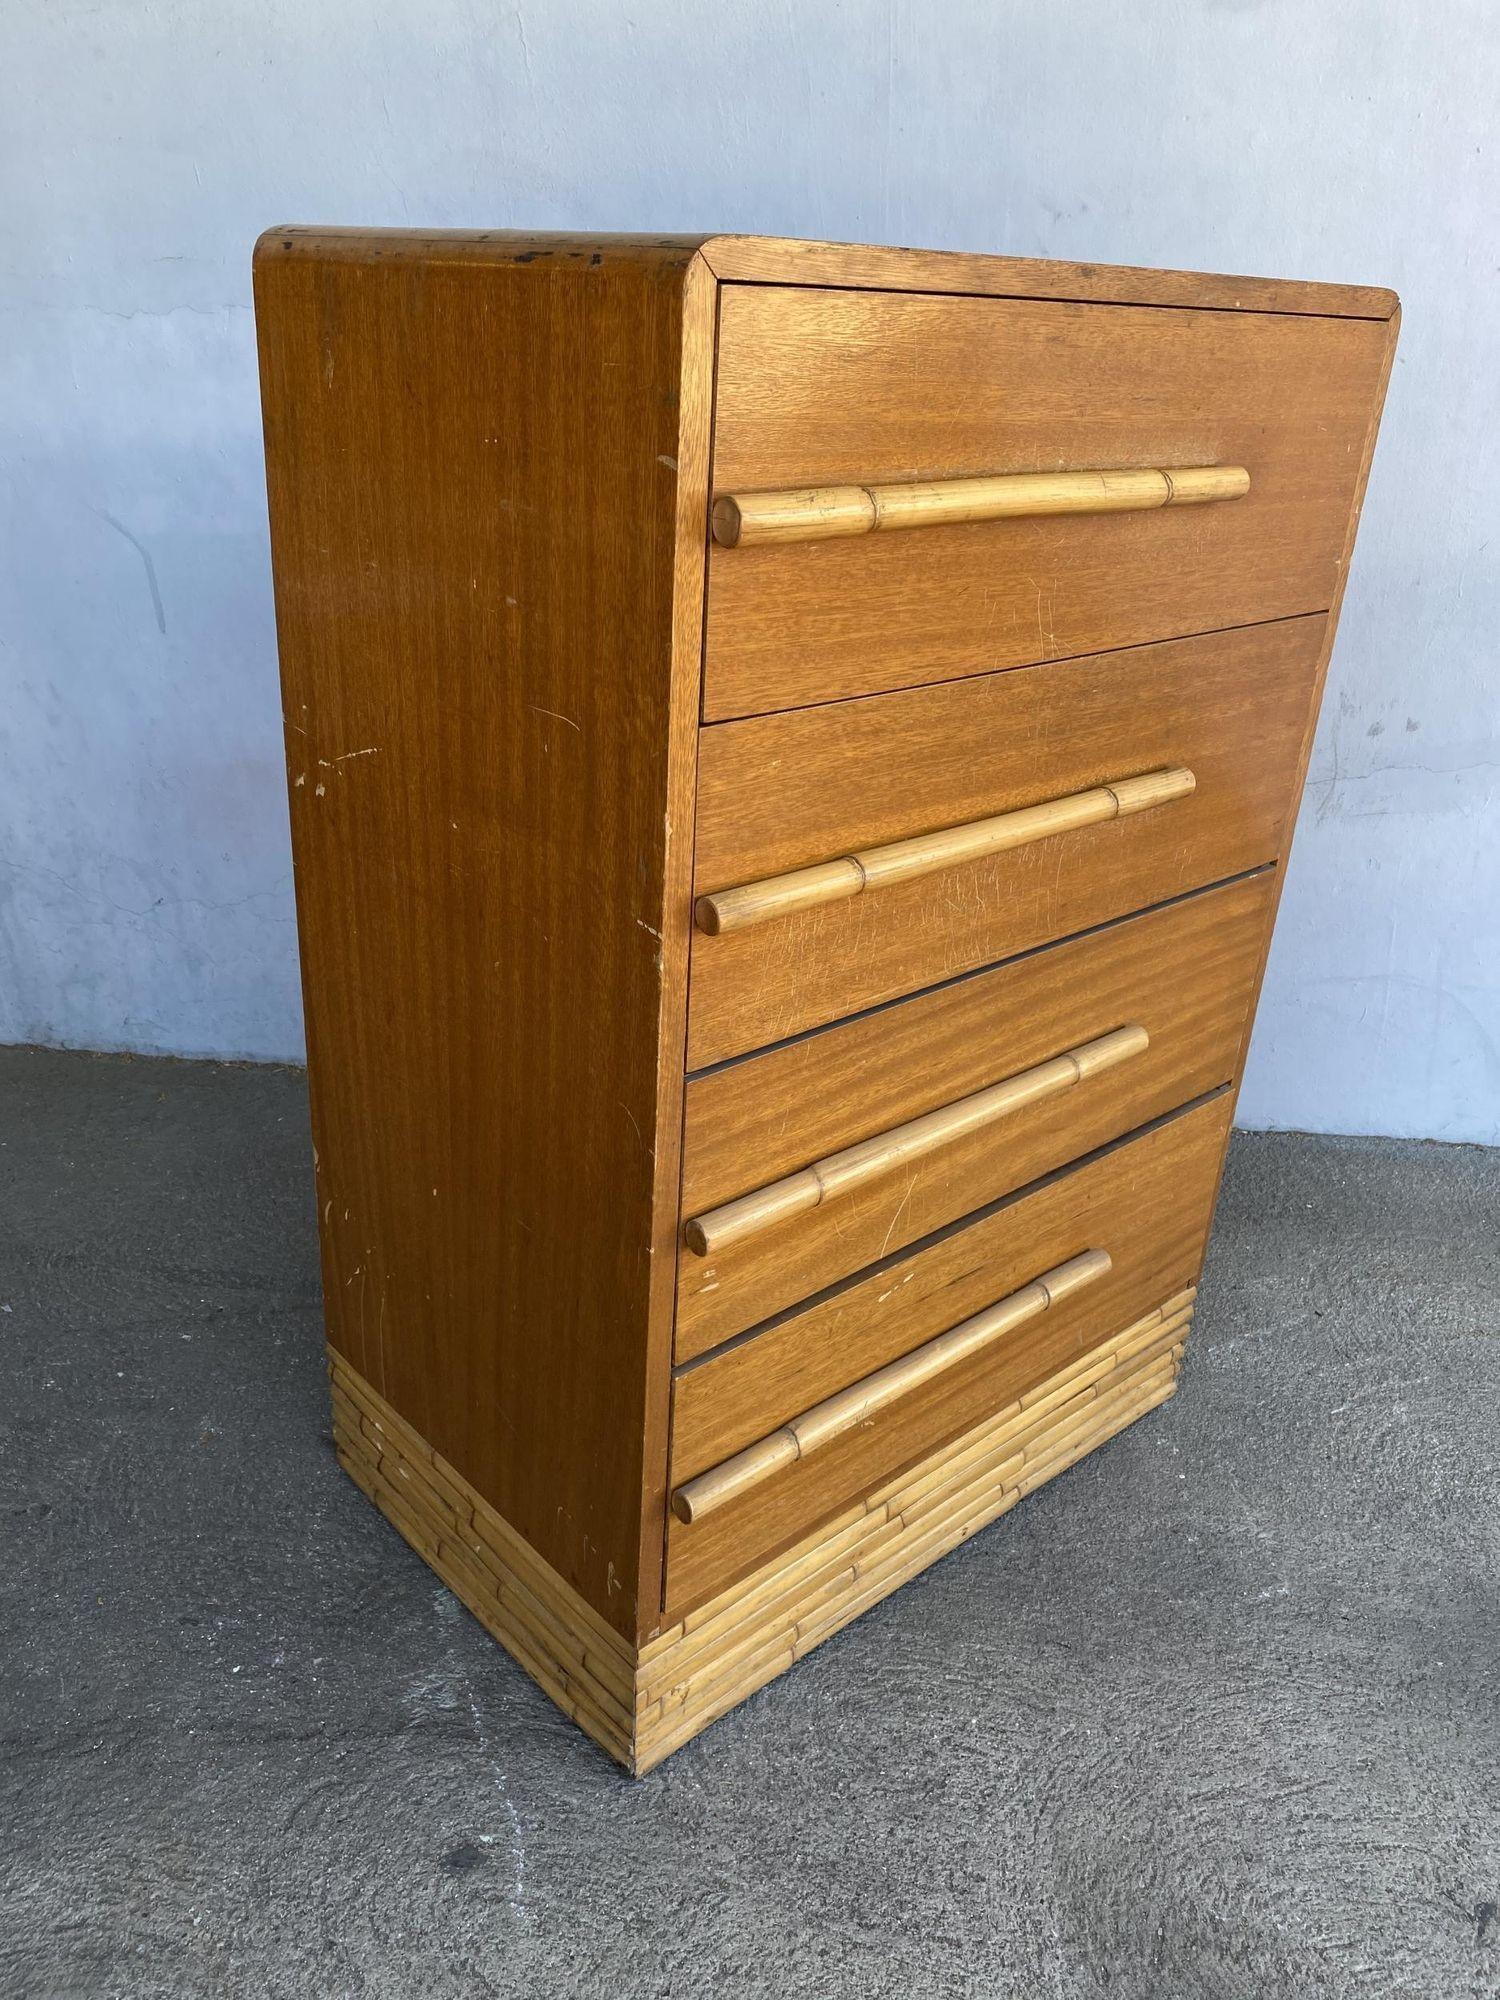 Restored midcentury mahogany highboy dresser with stacked rattan base and oversized custom made long strip rattan drawer pulls. This highboy dresser features 4 large full-sized drawers for storage.
We only purchase and sell only the best and finest